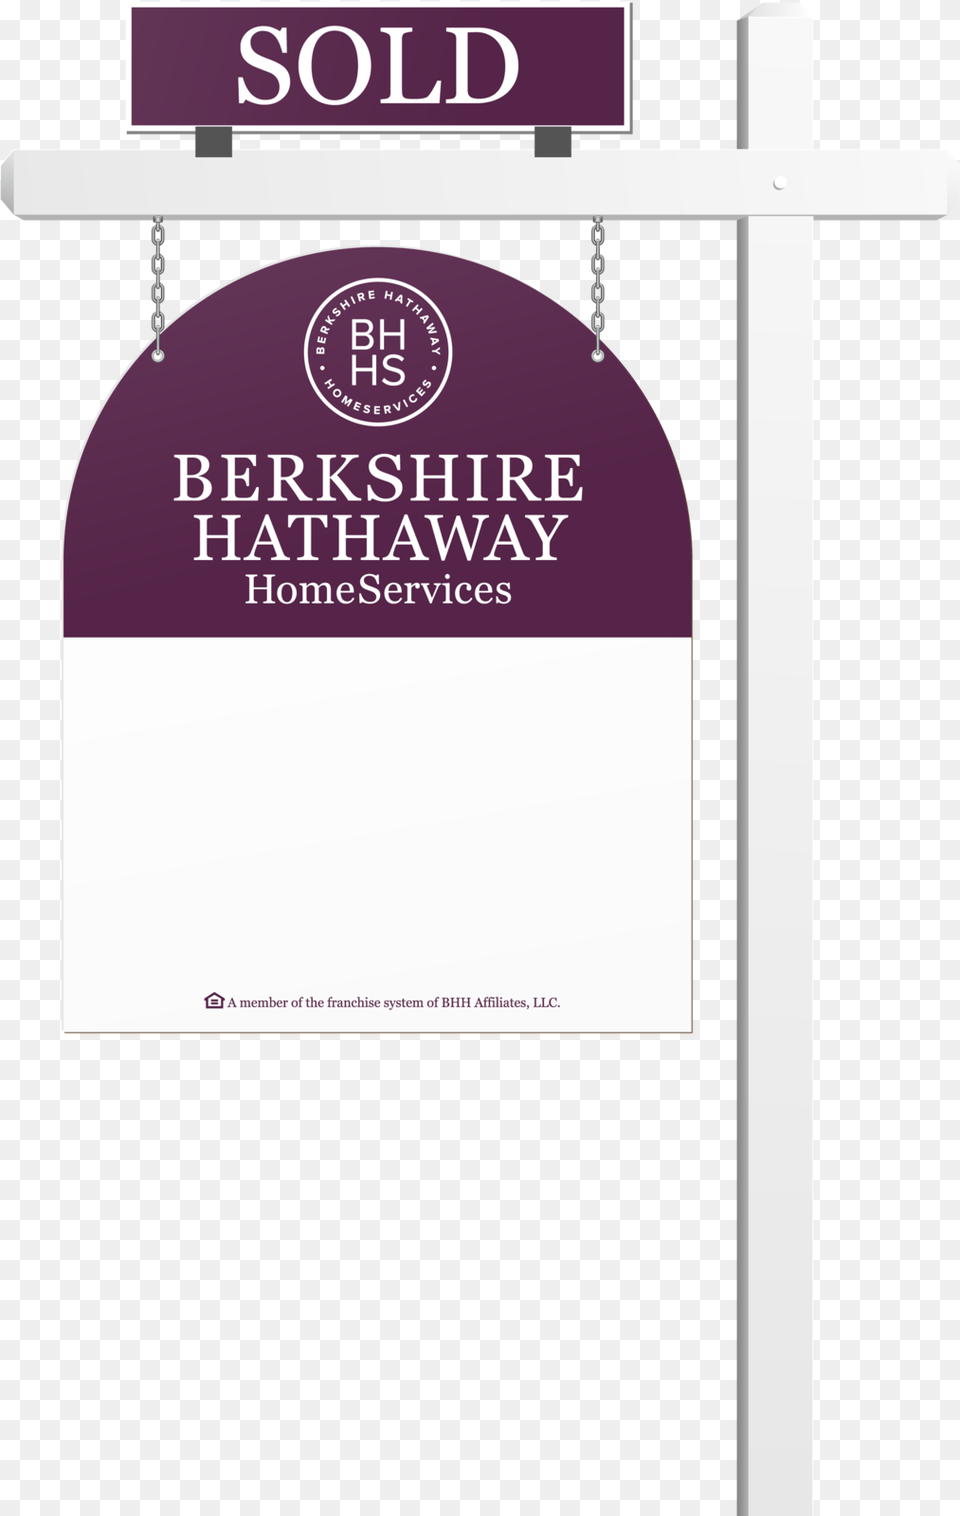 Berkshire Hathaway Homeservices Yard Sign, Advertisement, Cross, Symbol, Poster Free Png